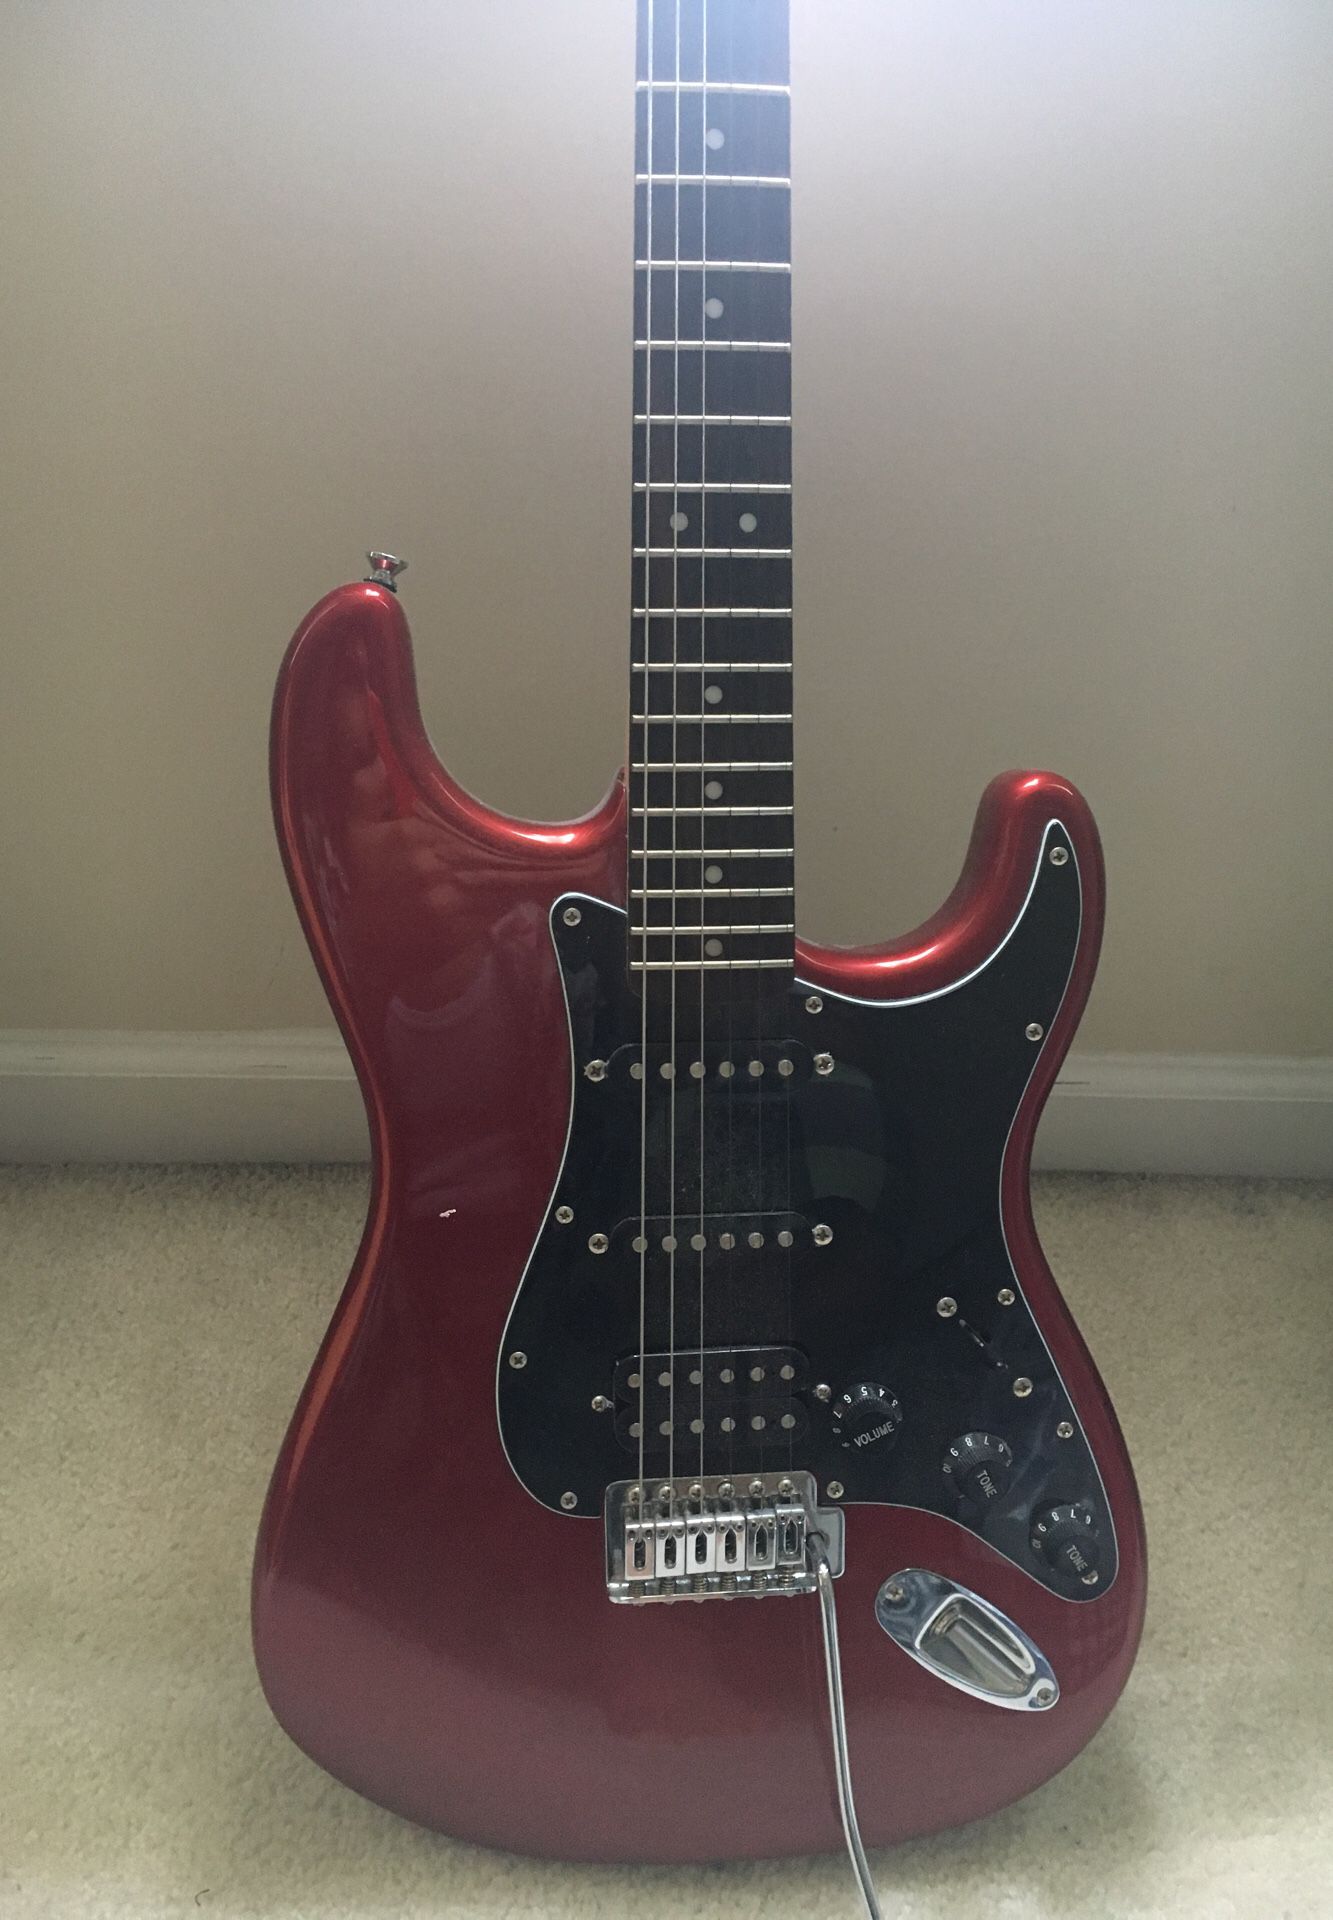 Fender Squire electric guitar